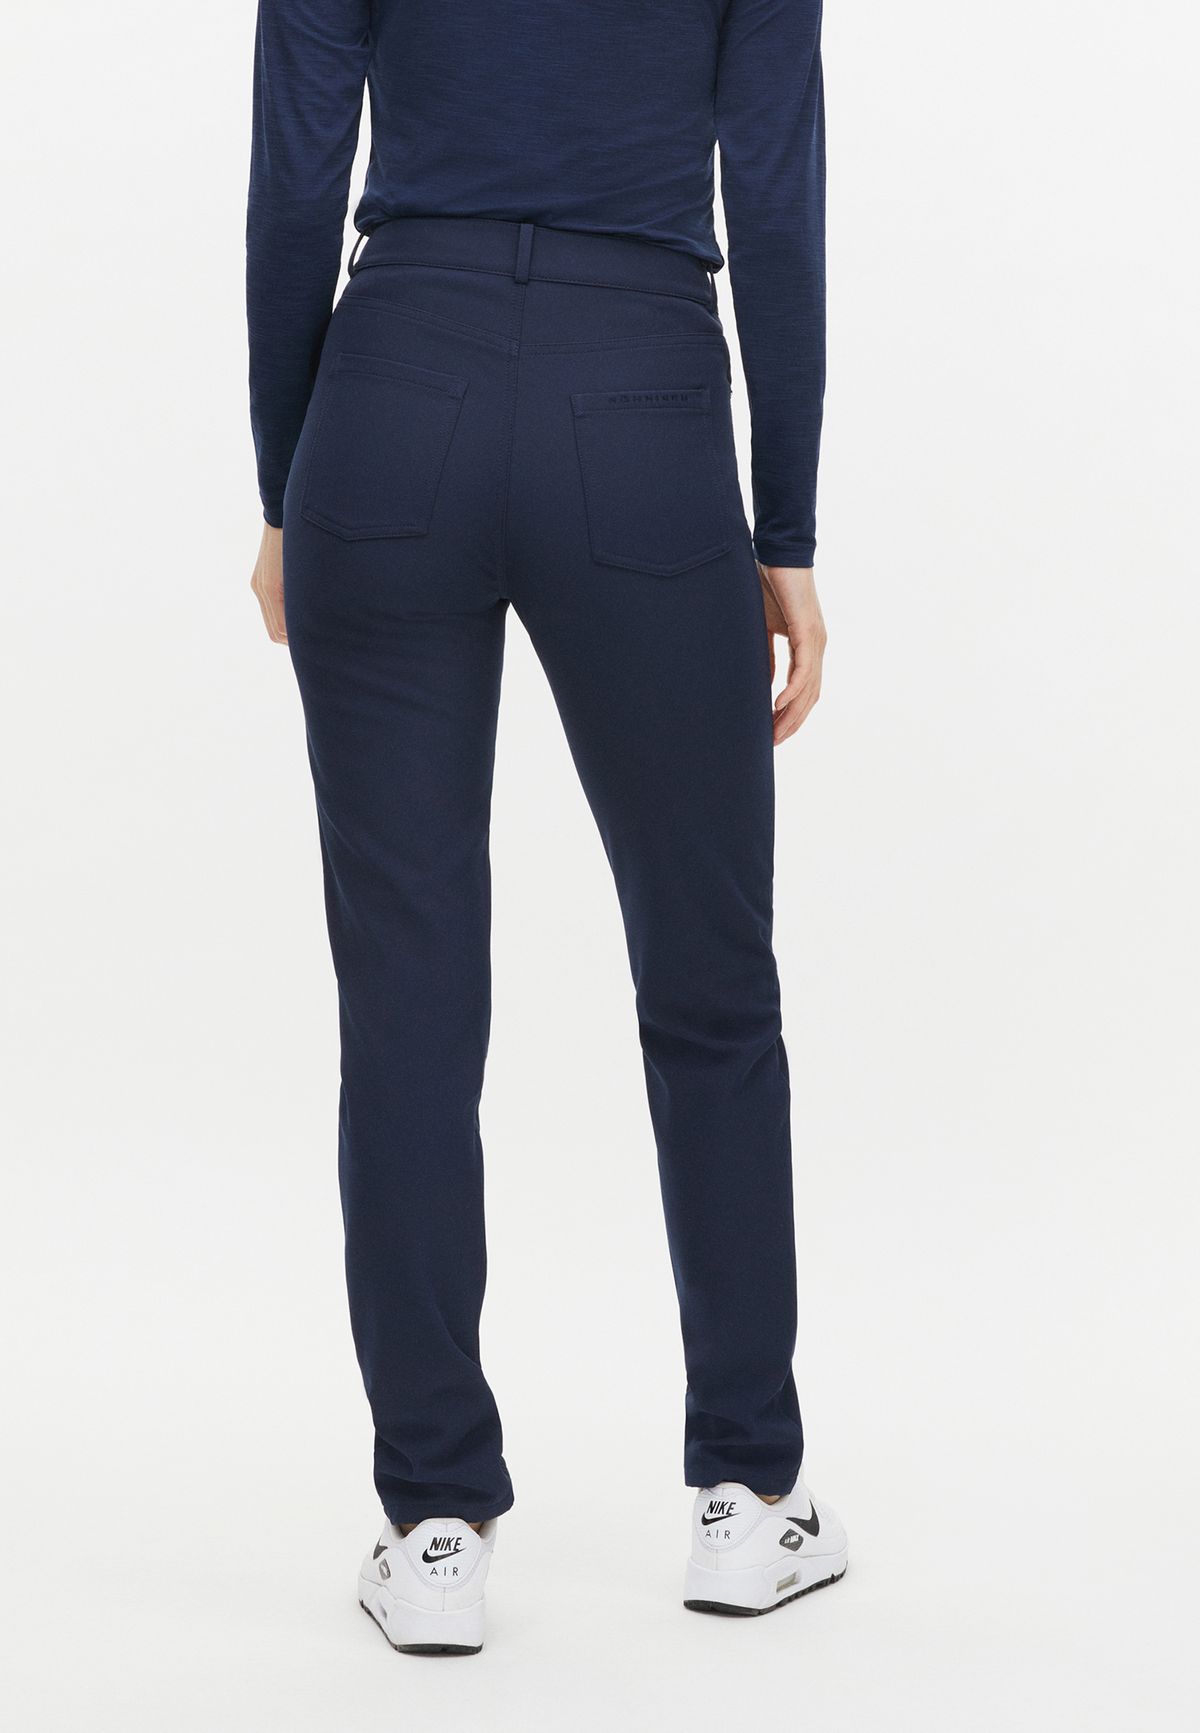 Insulate pants 30, Navy